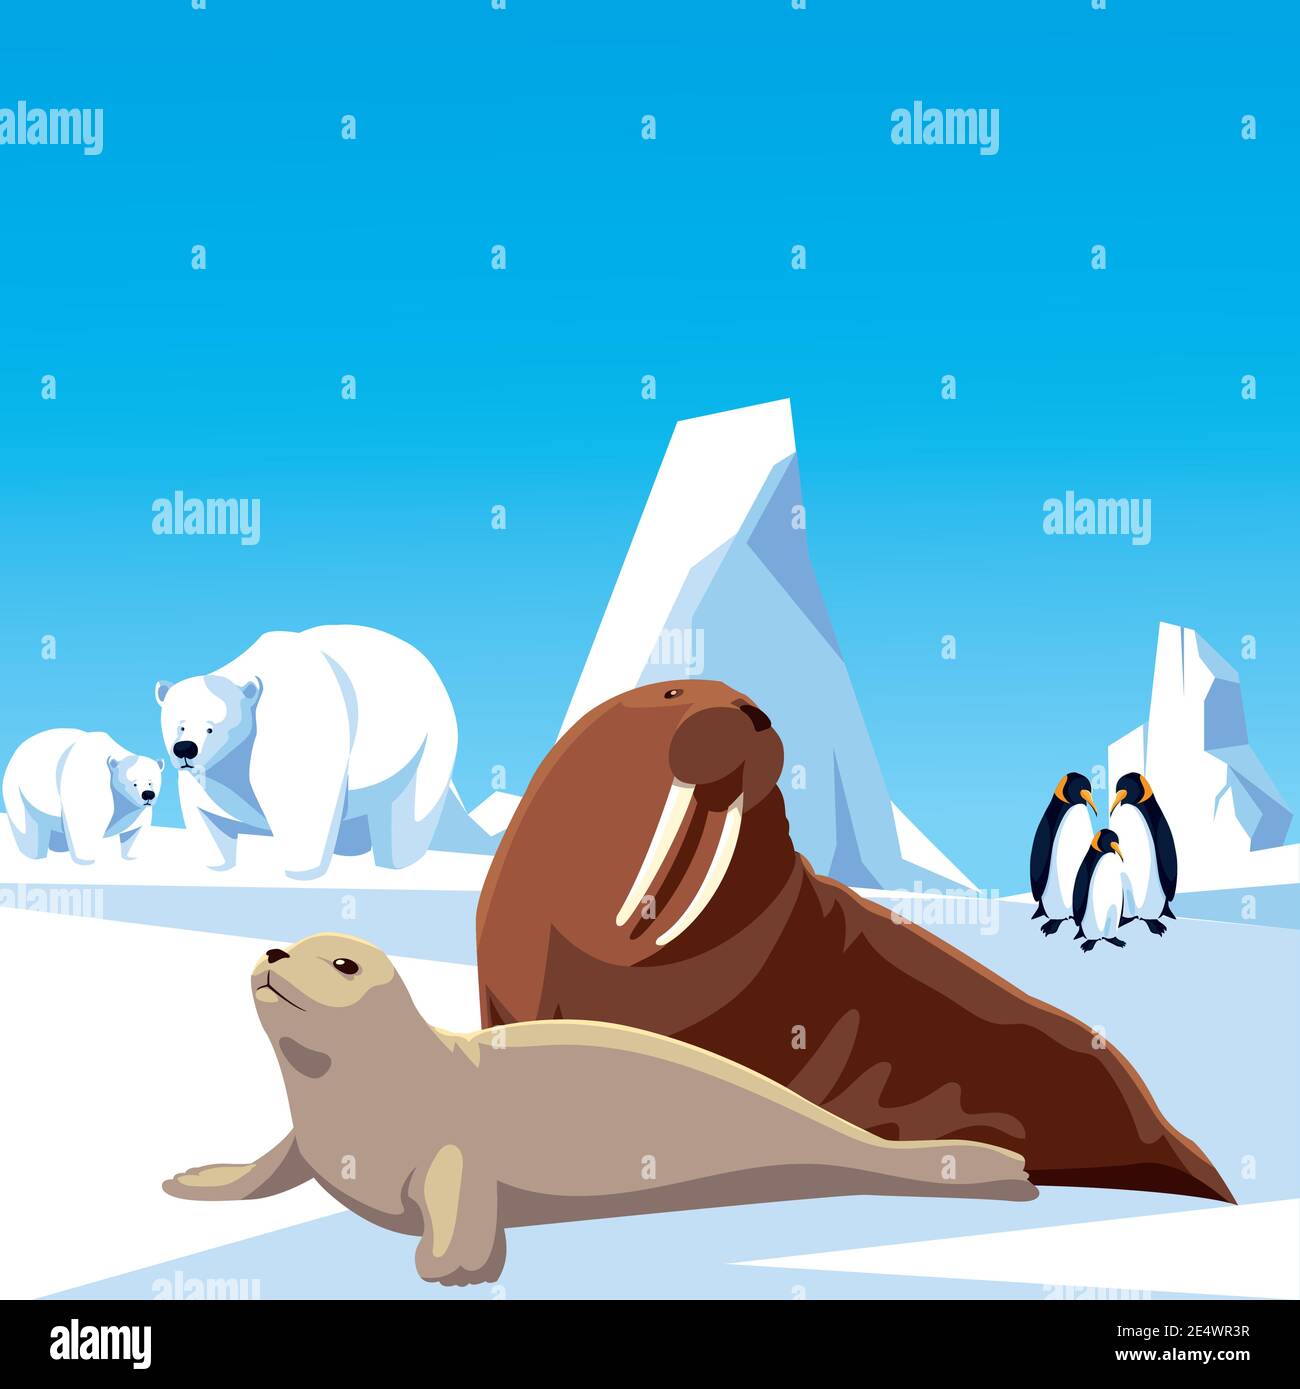 penguins polar bears walrus and seal animals north pole and iceberg landscape vector illustration Stock Vector